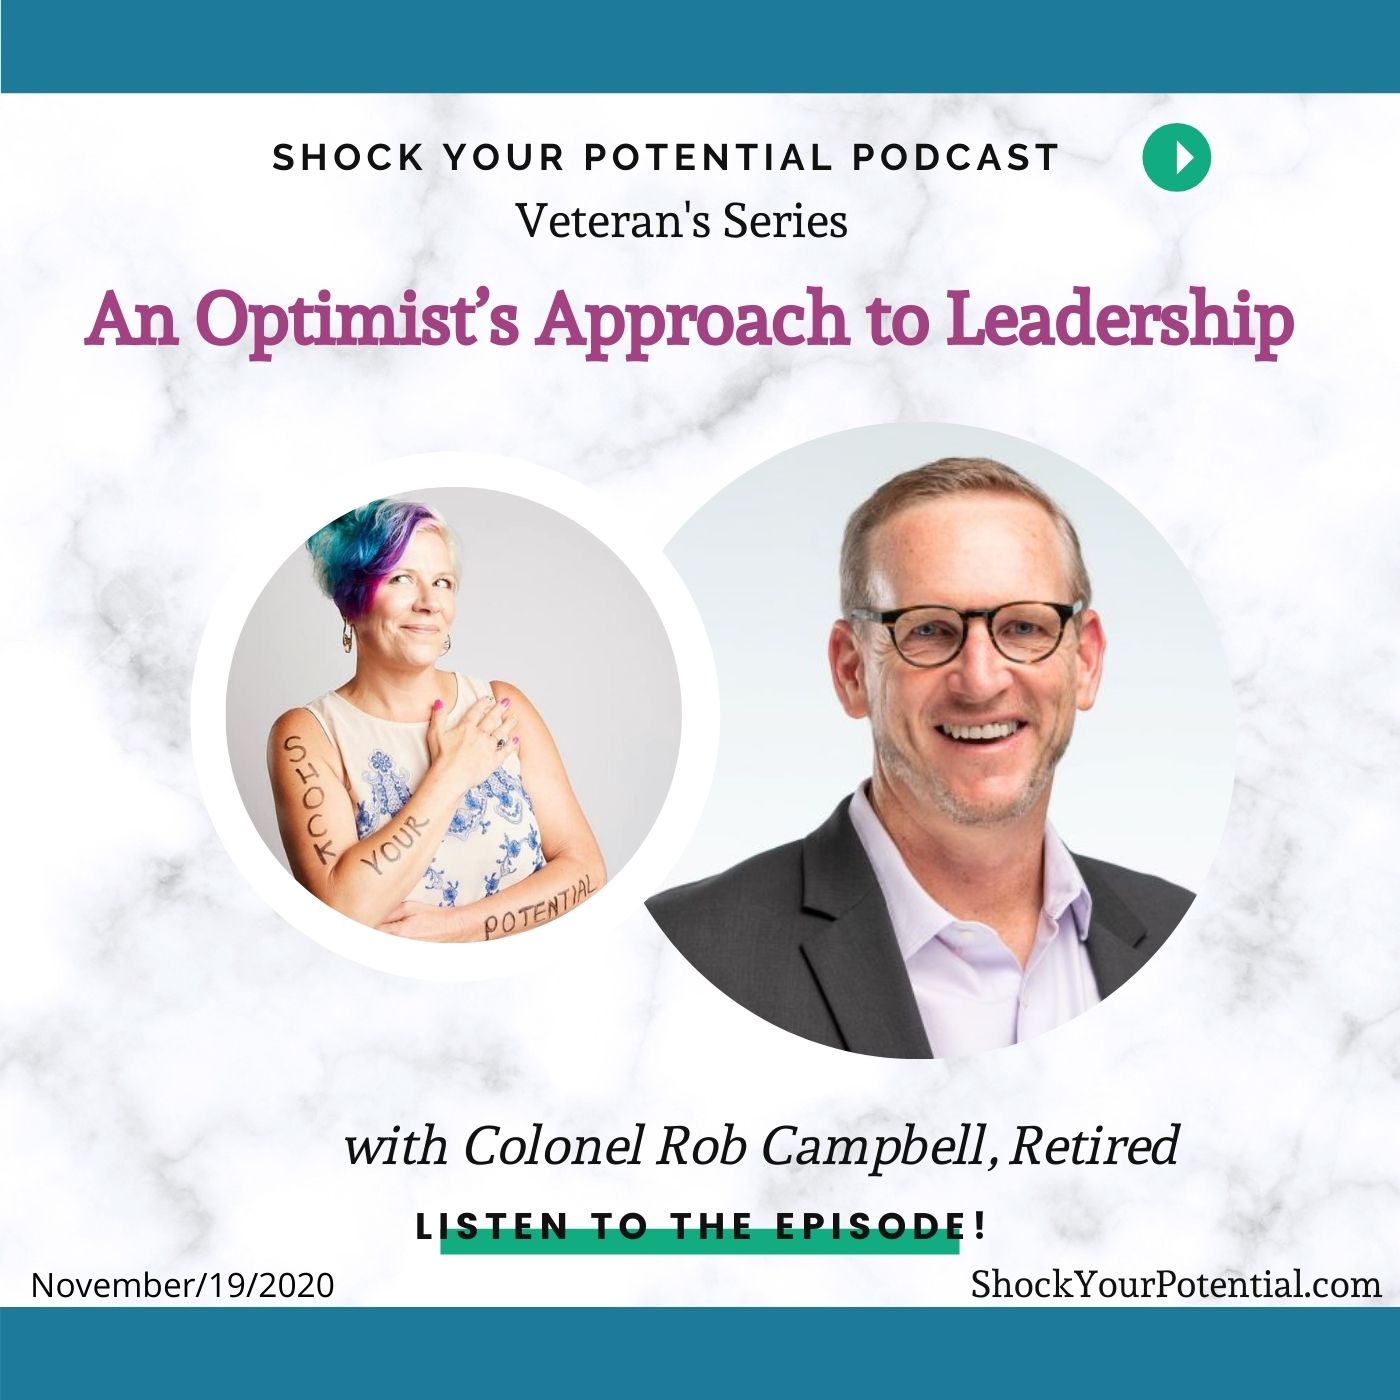 An Optimist’s Approach to Leadership – Colonel Rob Campbell, Retired